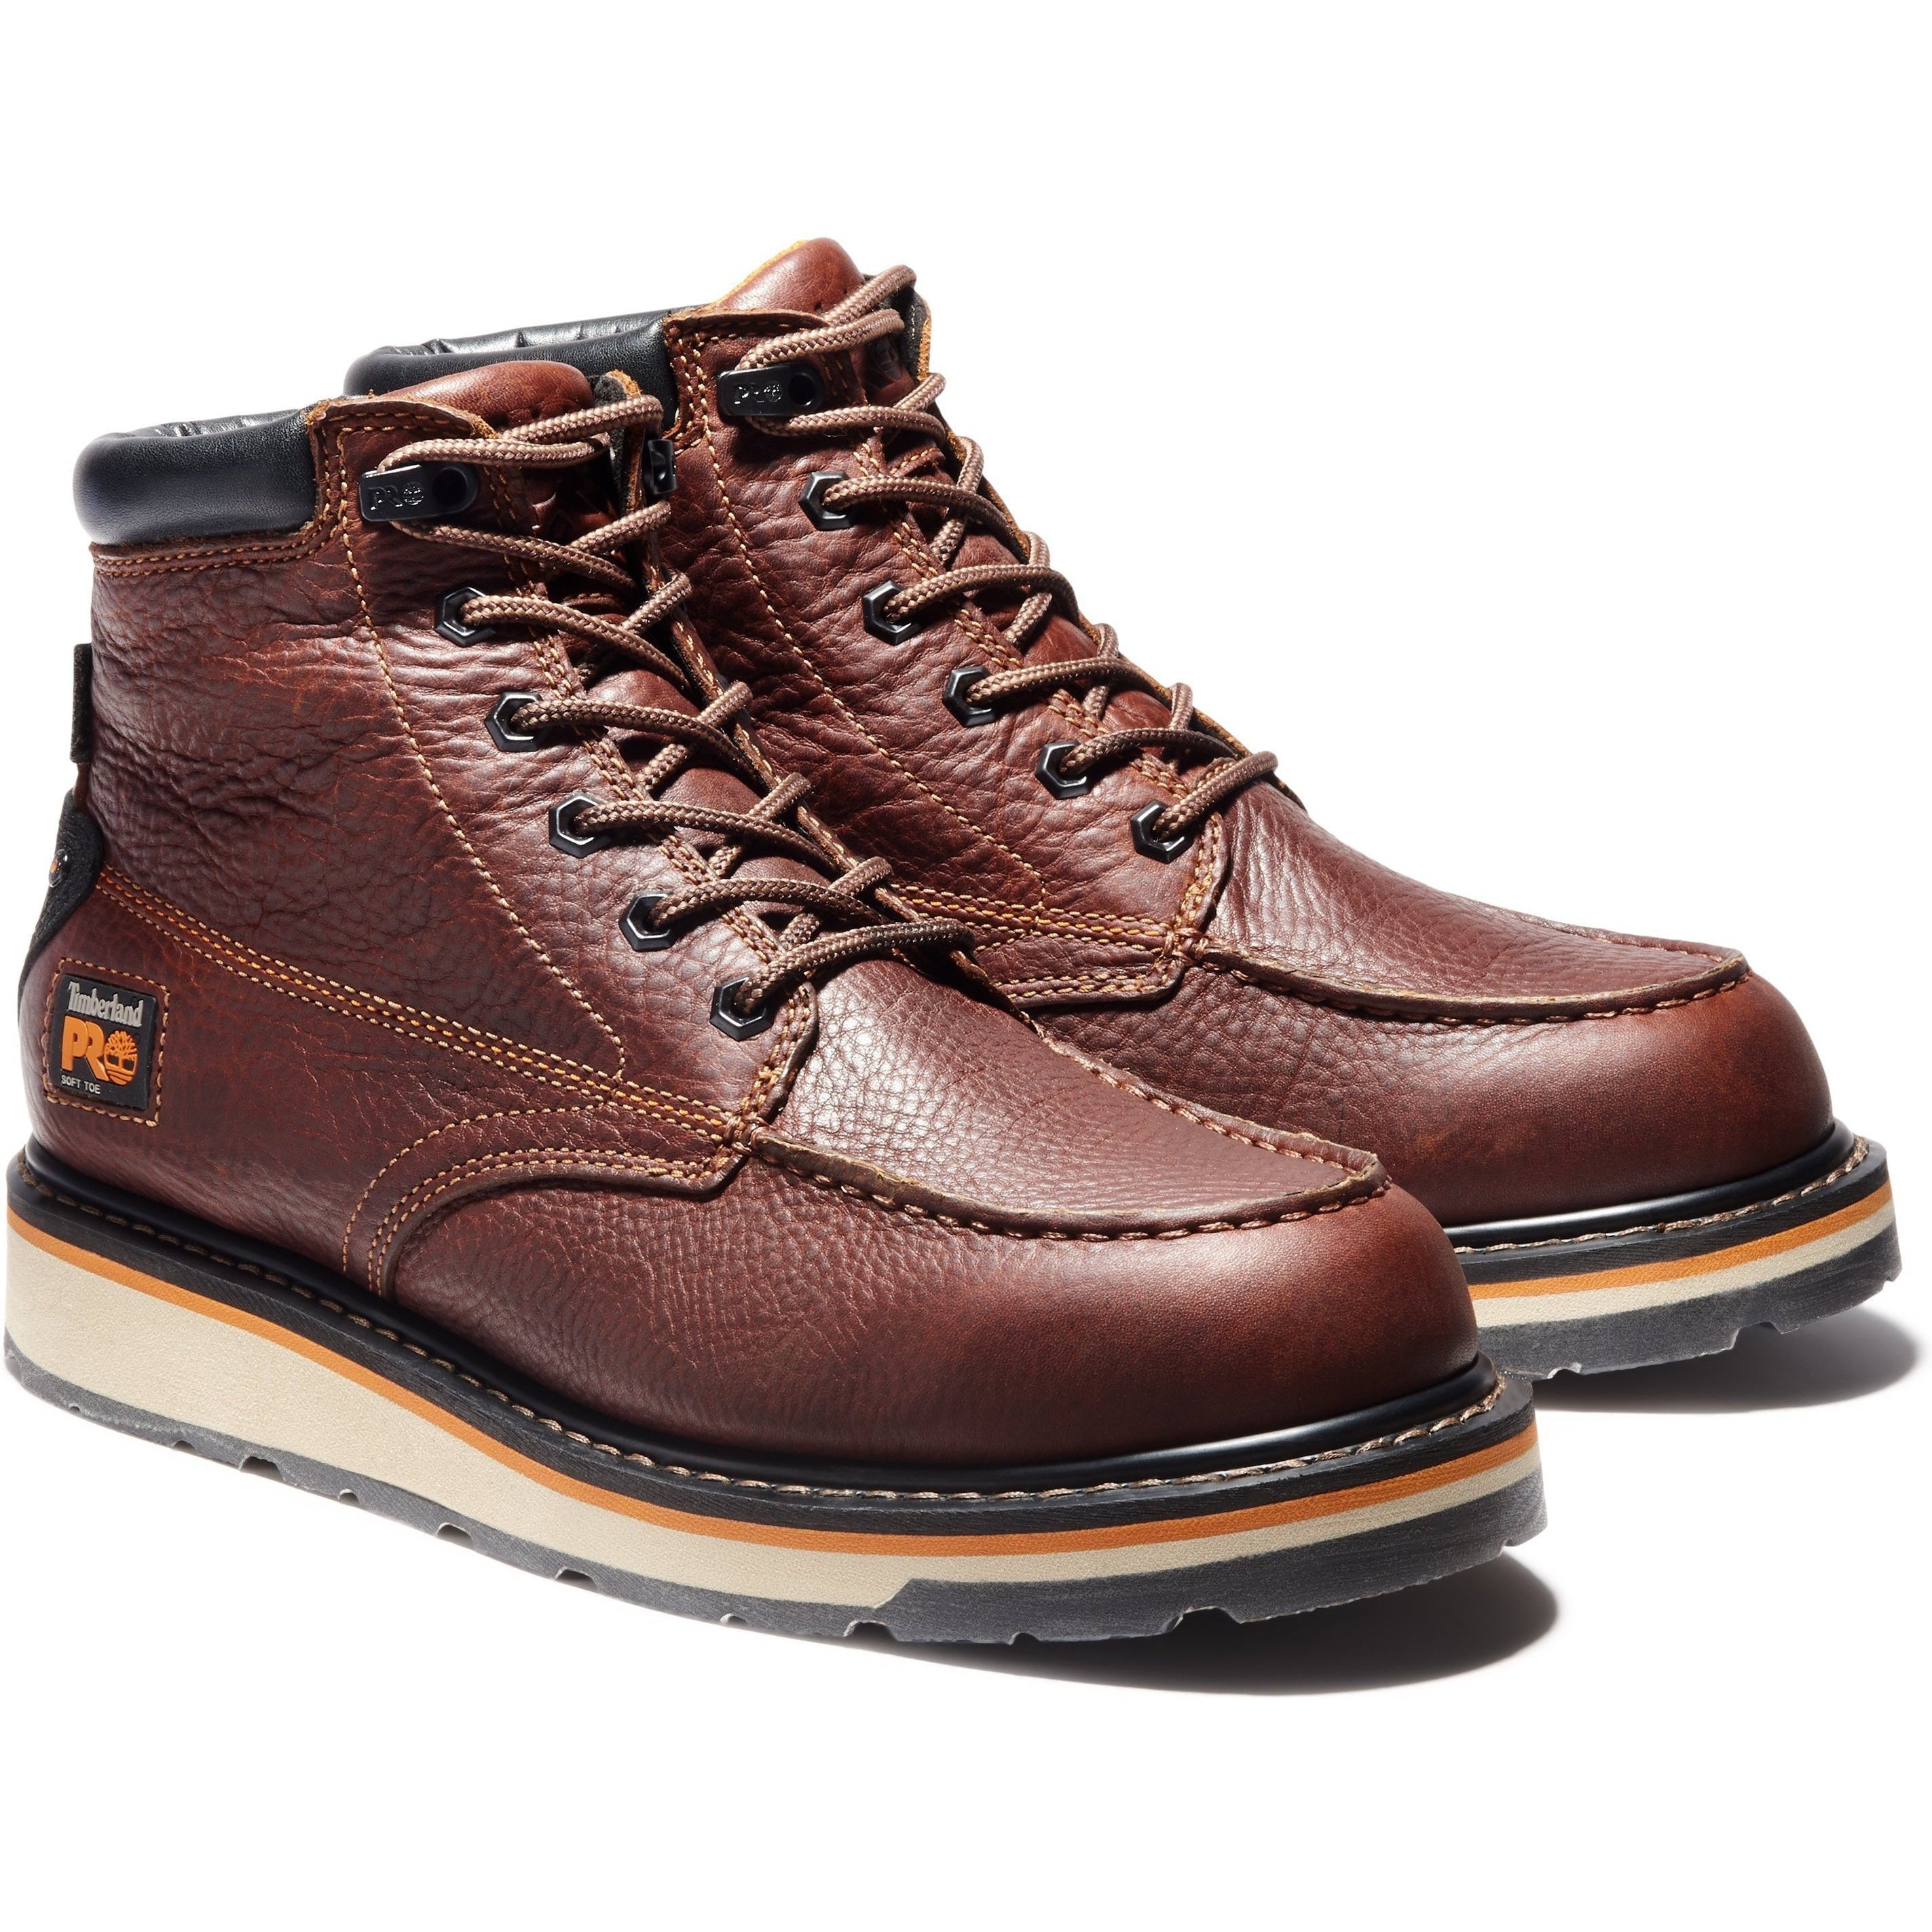 Timberland PRO Gridworks 6" WP Wedge Work Boot - Brown - TB0A1KRQ214 8.5 / Medium / Brown - Overlook Boots